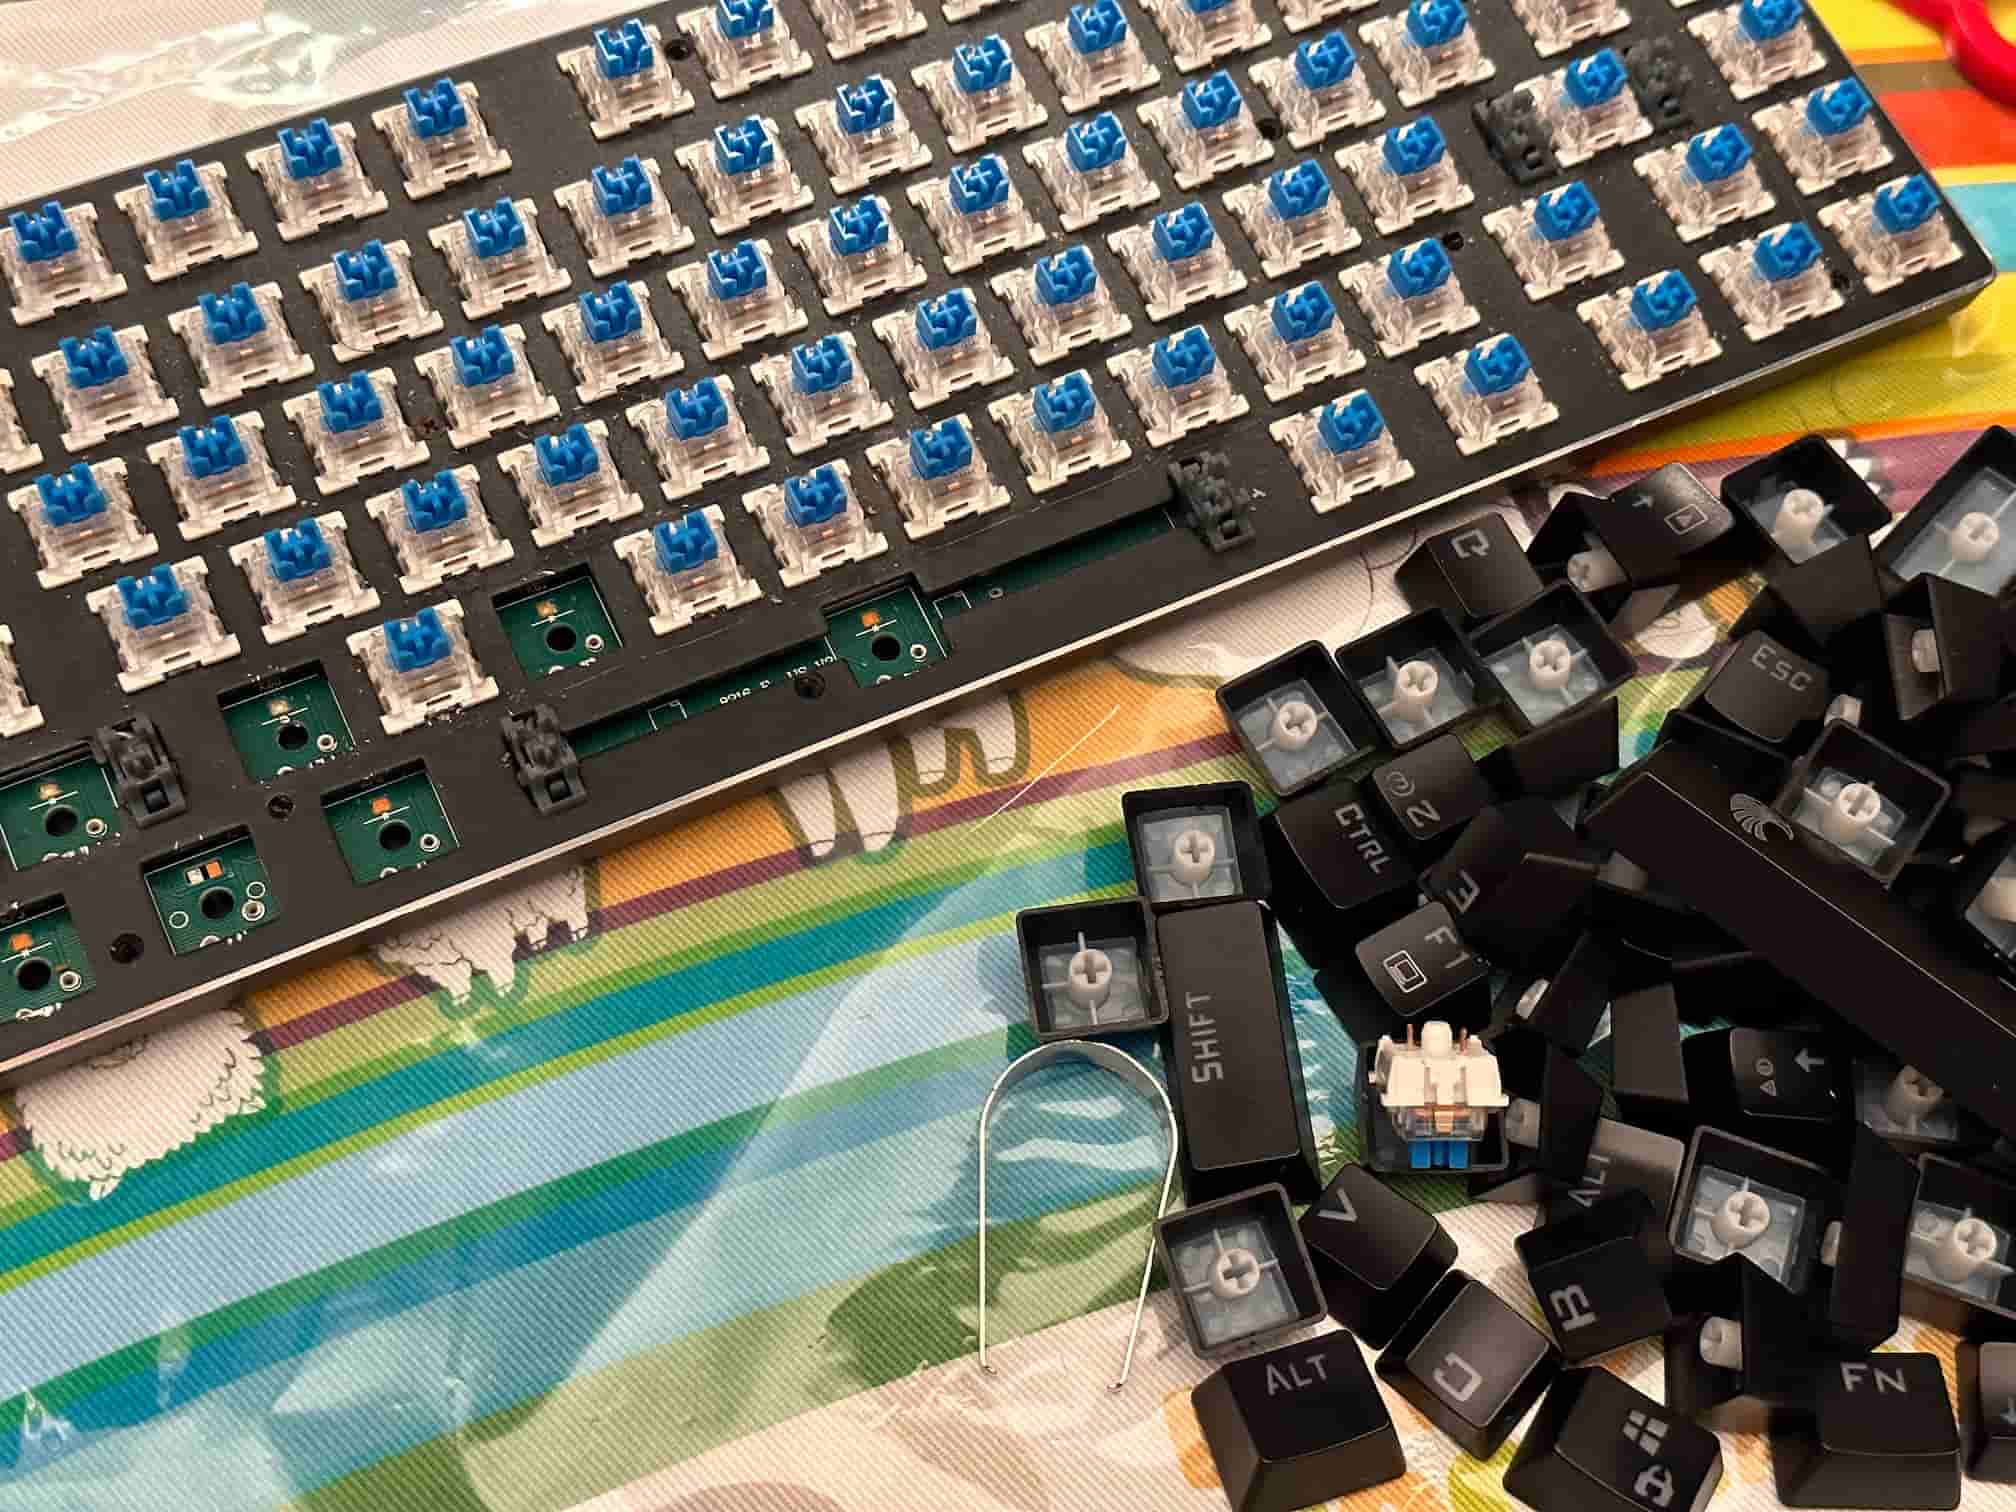 My E-Yooso Z-88 mechanical keyboard with its keycaps taken off, showing blue switches. Some switches popped out easily, but others were stubborn and hard to remove